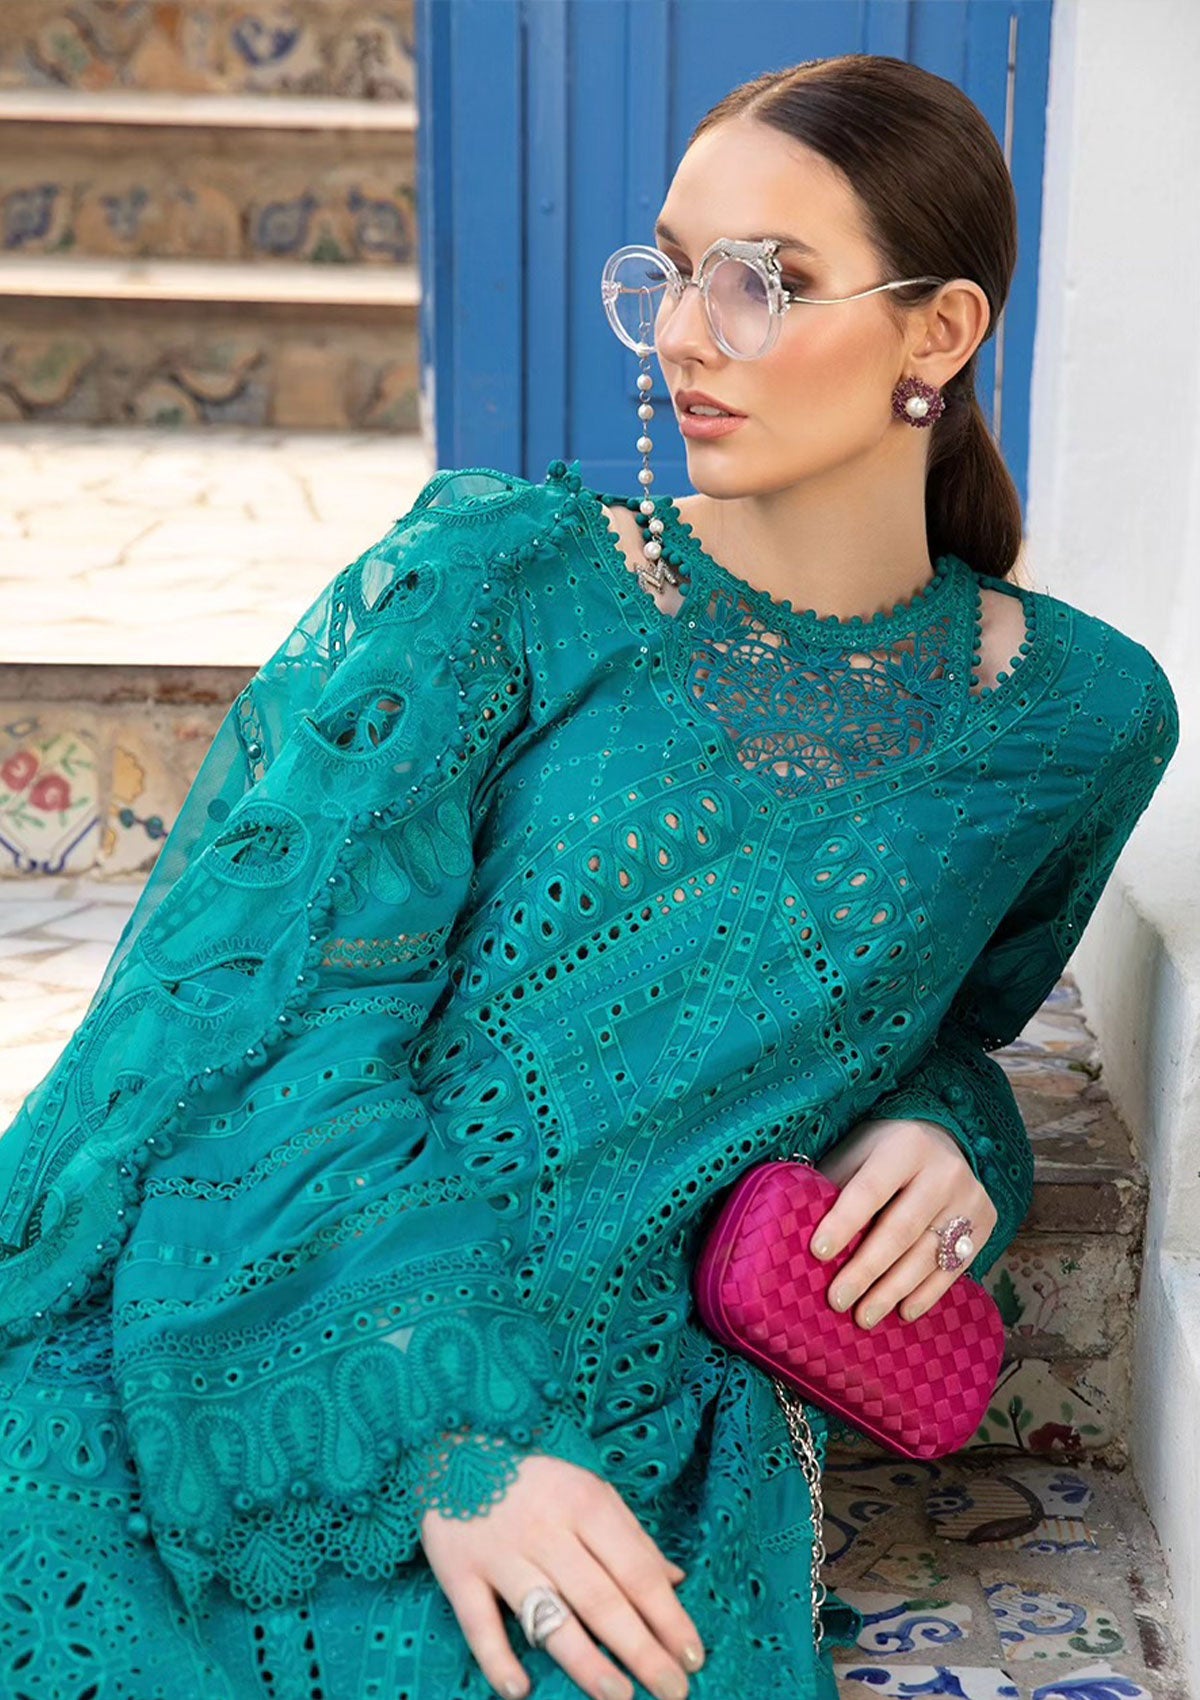 Lawn Collection - Maria B - Voyage a'Luxe - Luxury - MB24#02A